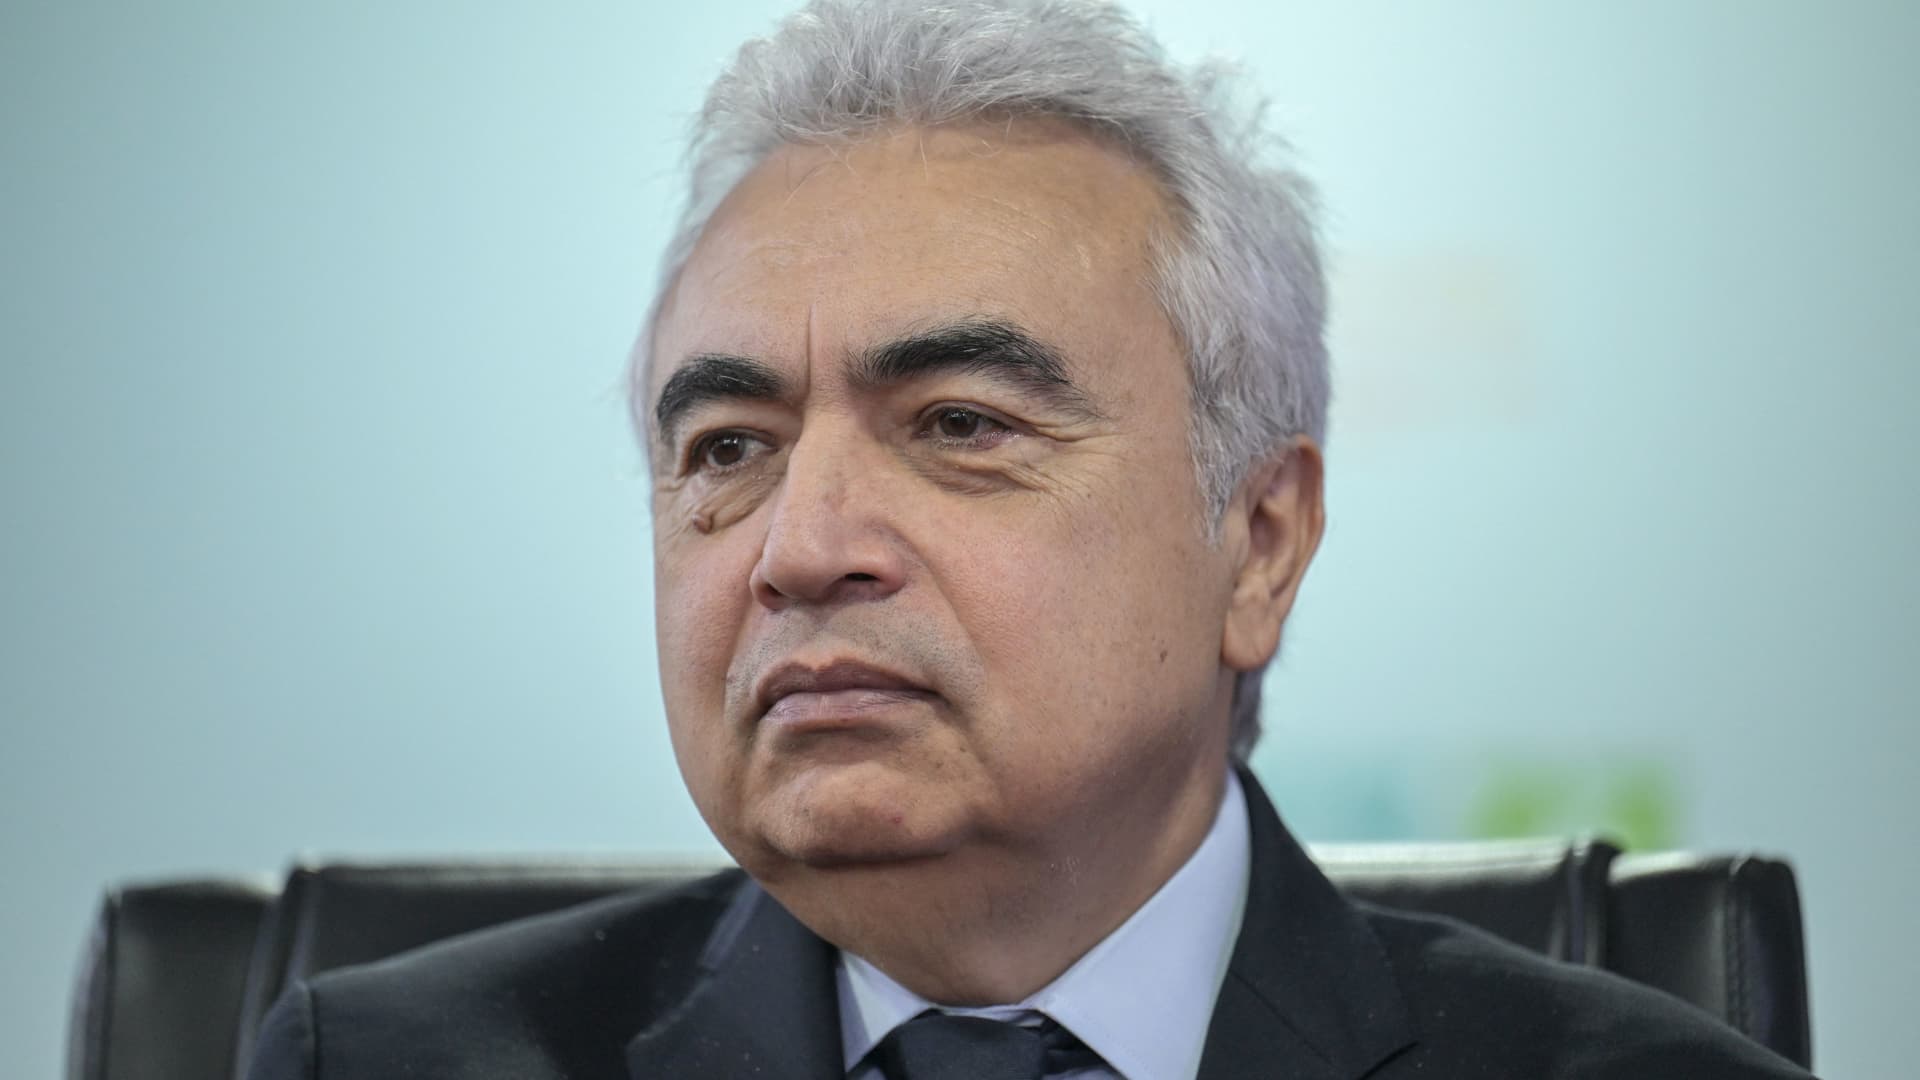 Demand for oil, gas and coal will peak by 2030, but that’s not fast enough to keep global warming within 1.5 levels, says IEA chief